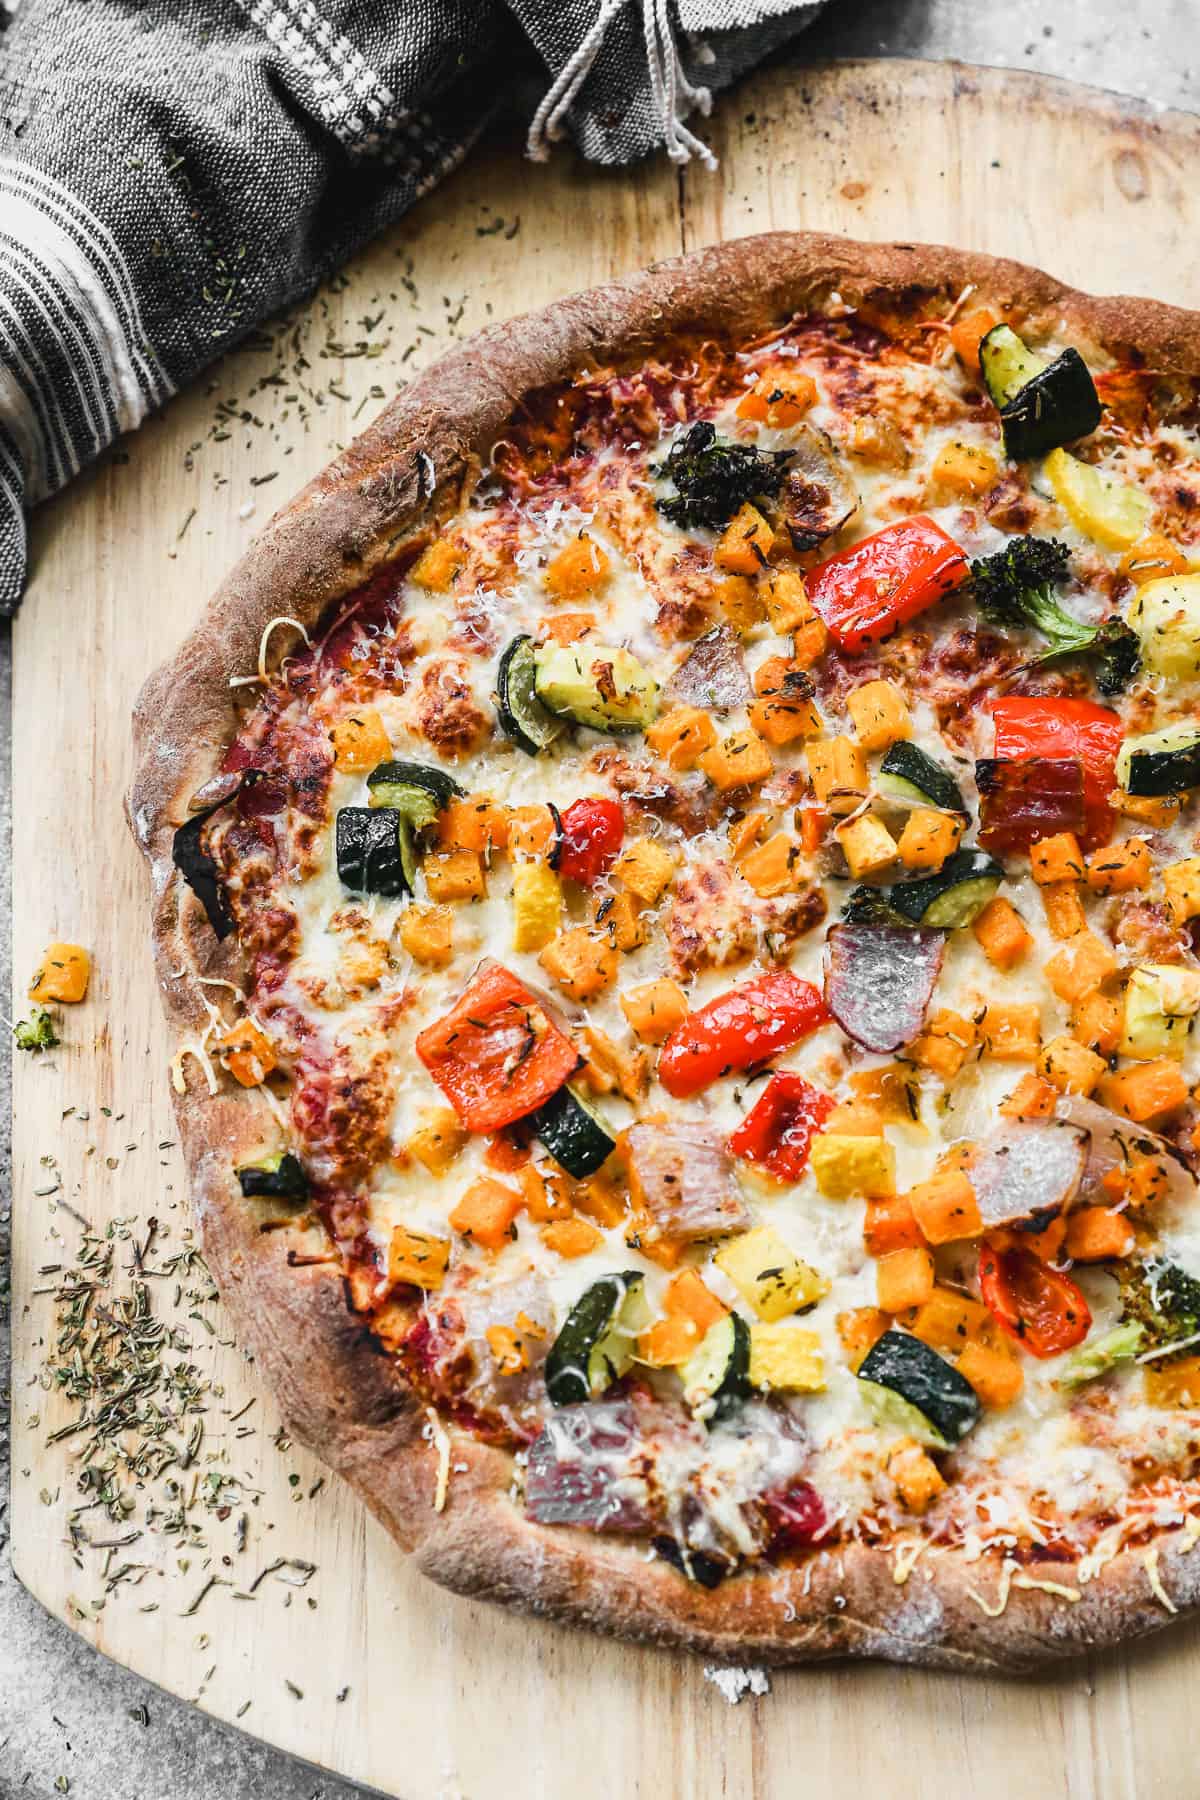 Homemade wheat pizza dough topped with pizza sauce, cheese, and a variety of vegetables.